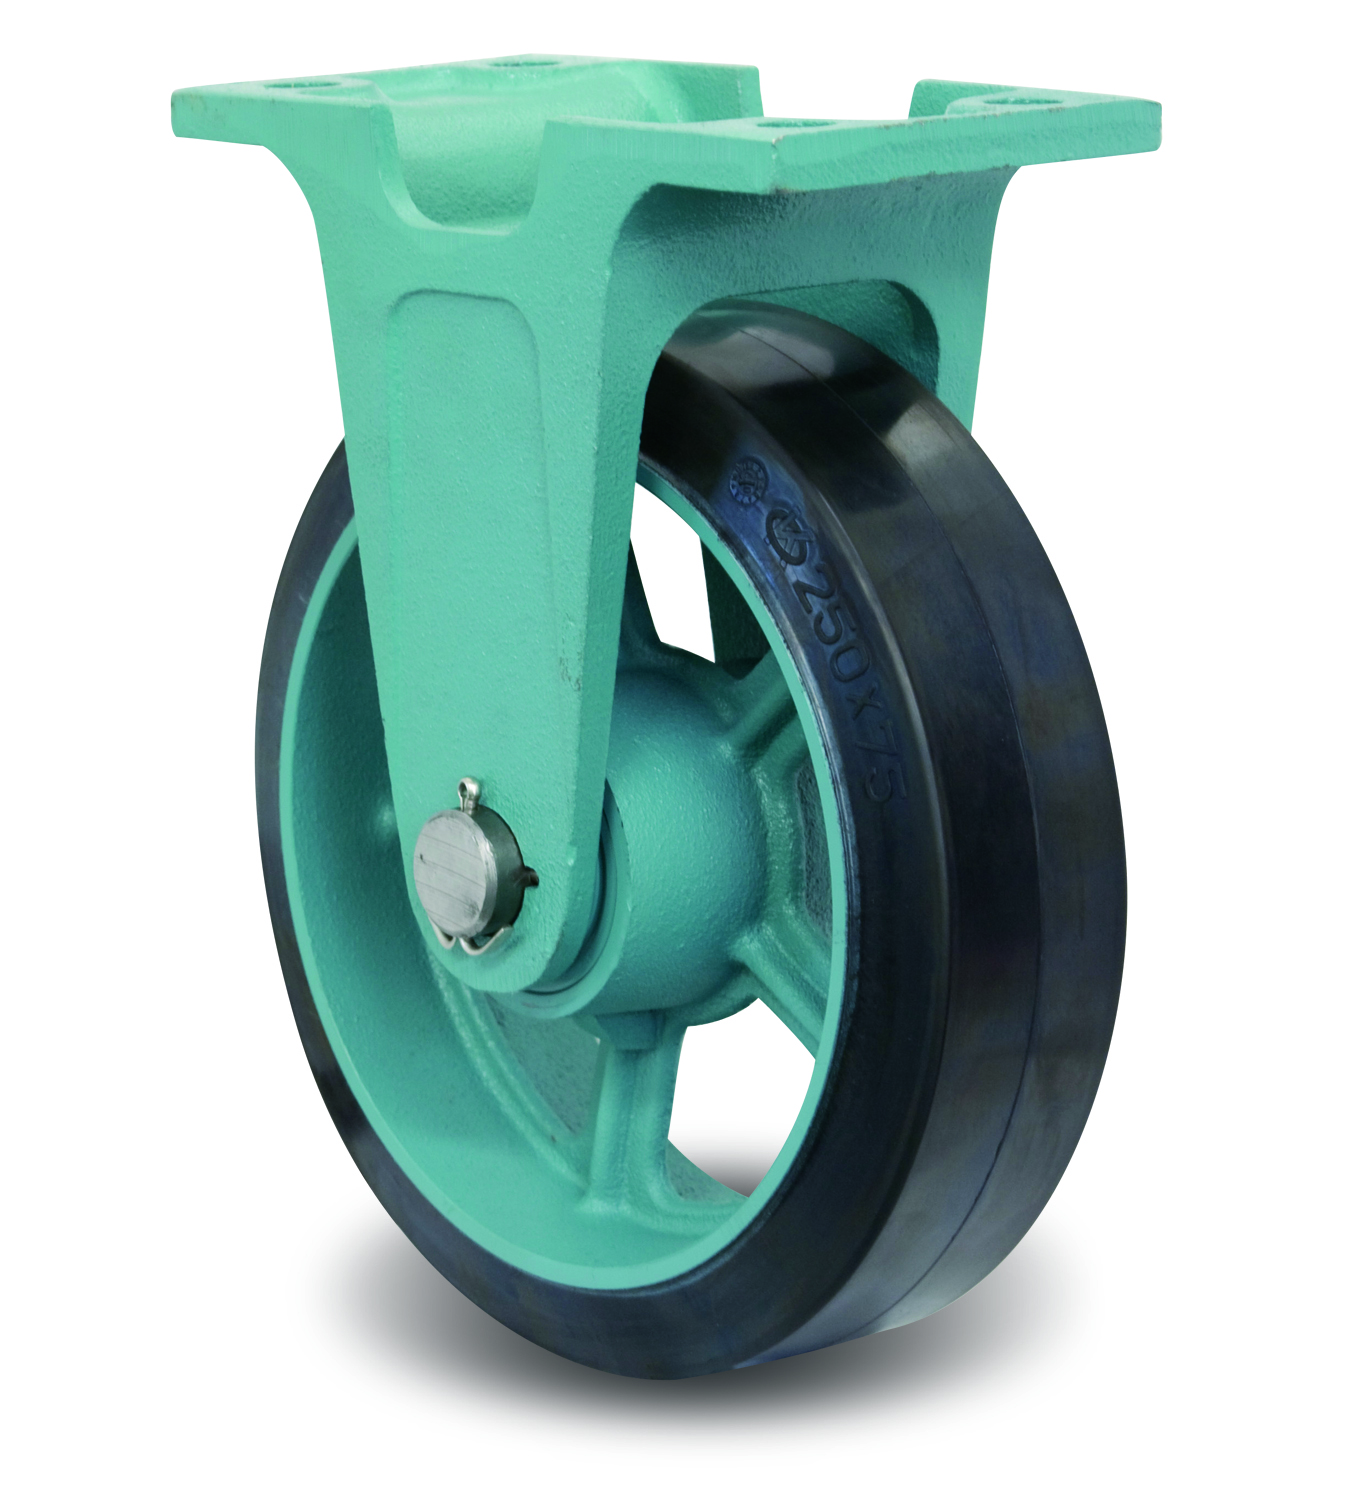 Ductile Caster Wide Type, Fixed MG-W Metal Fittings, E-MG-W (EMG-W200X65) 